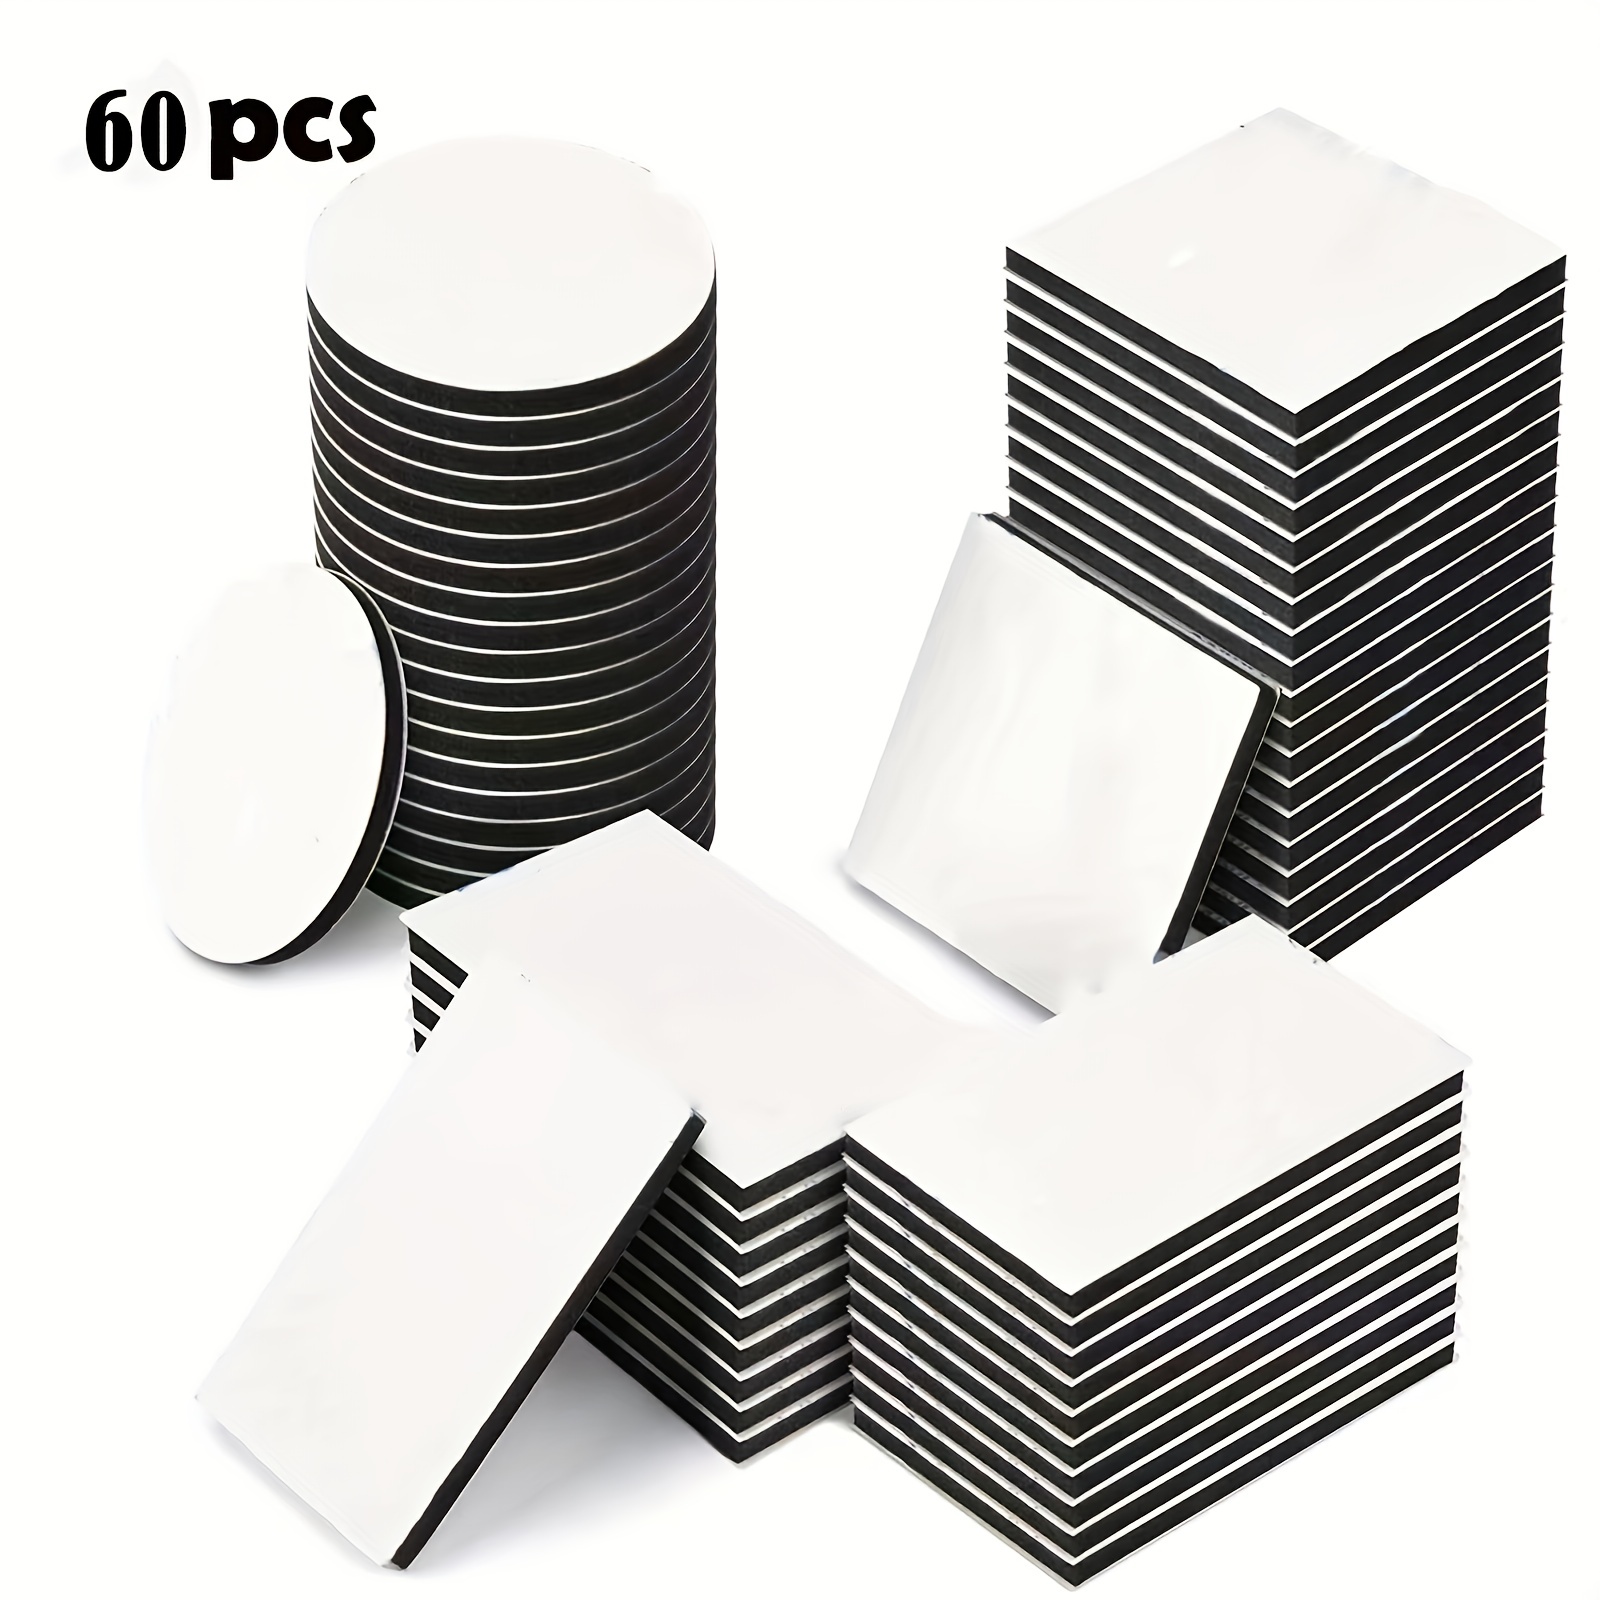 

60pcs Double-sided Adhesive Pads, Strong Sticky Punch Free Pad For Pictures, Photo Frame, Wall, Household Storage Organizer For Kitchen, Bedroom, Bathroom, Office, Desk, Wall Decor Essential